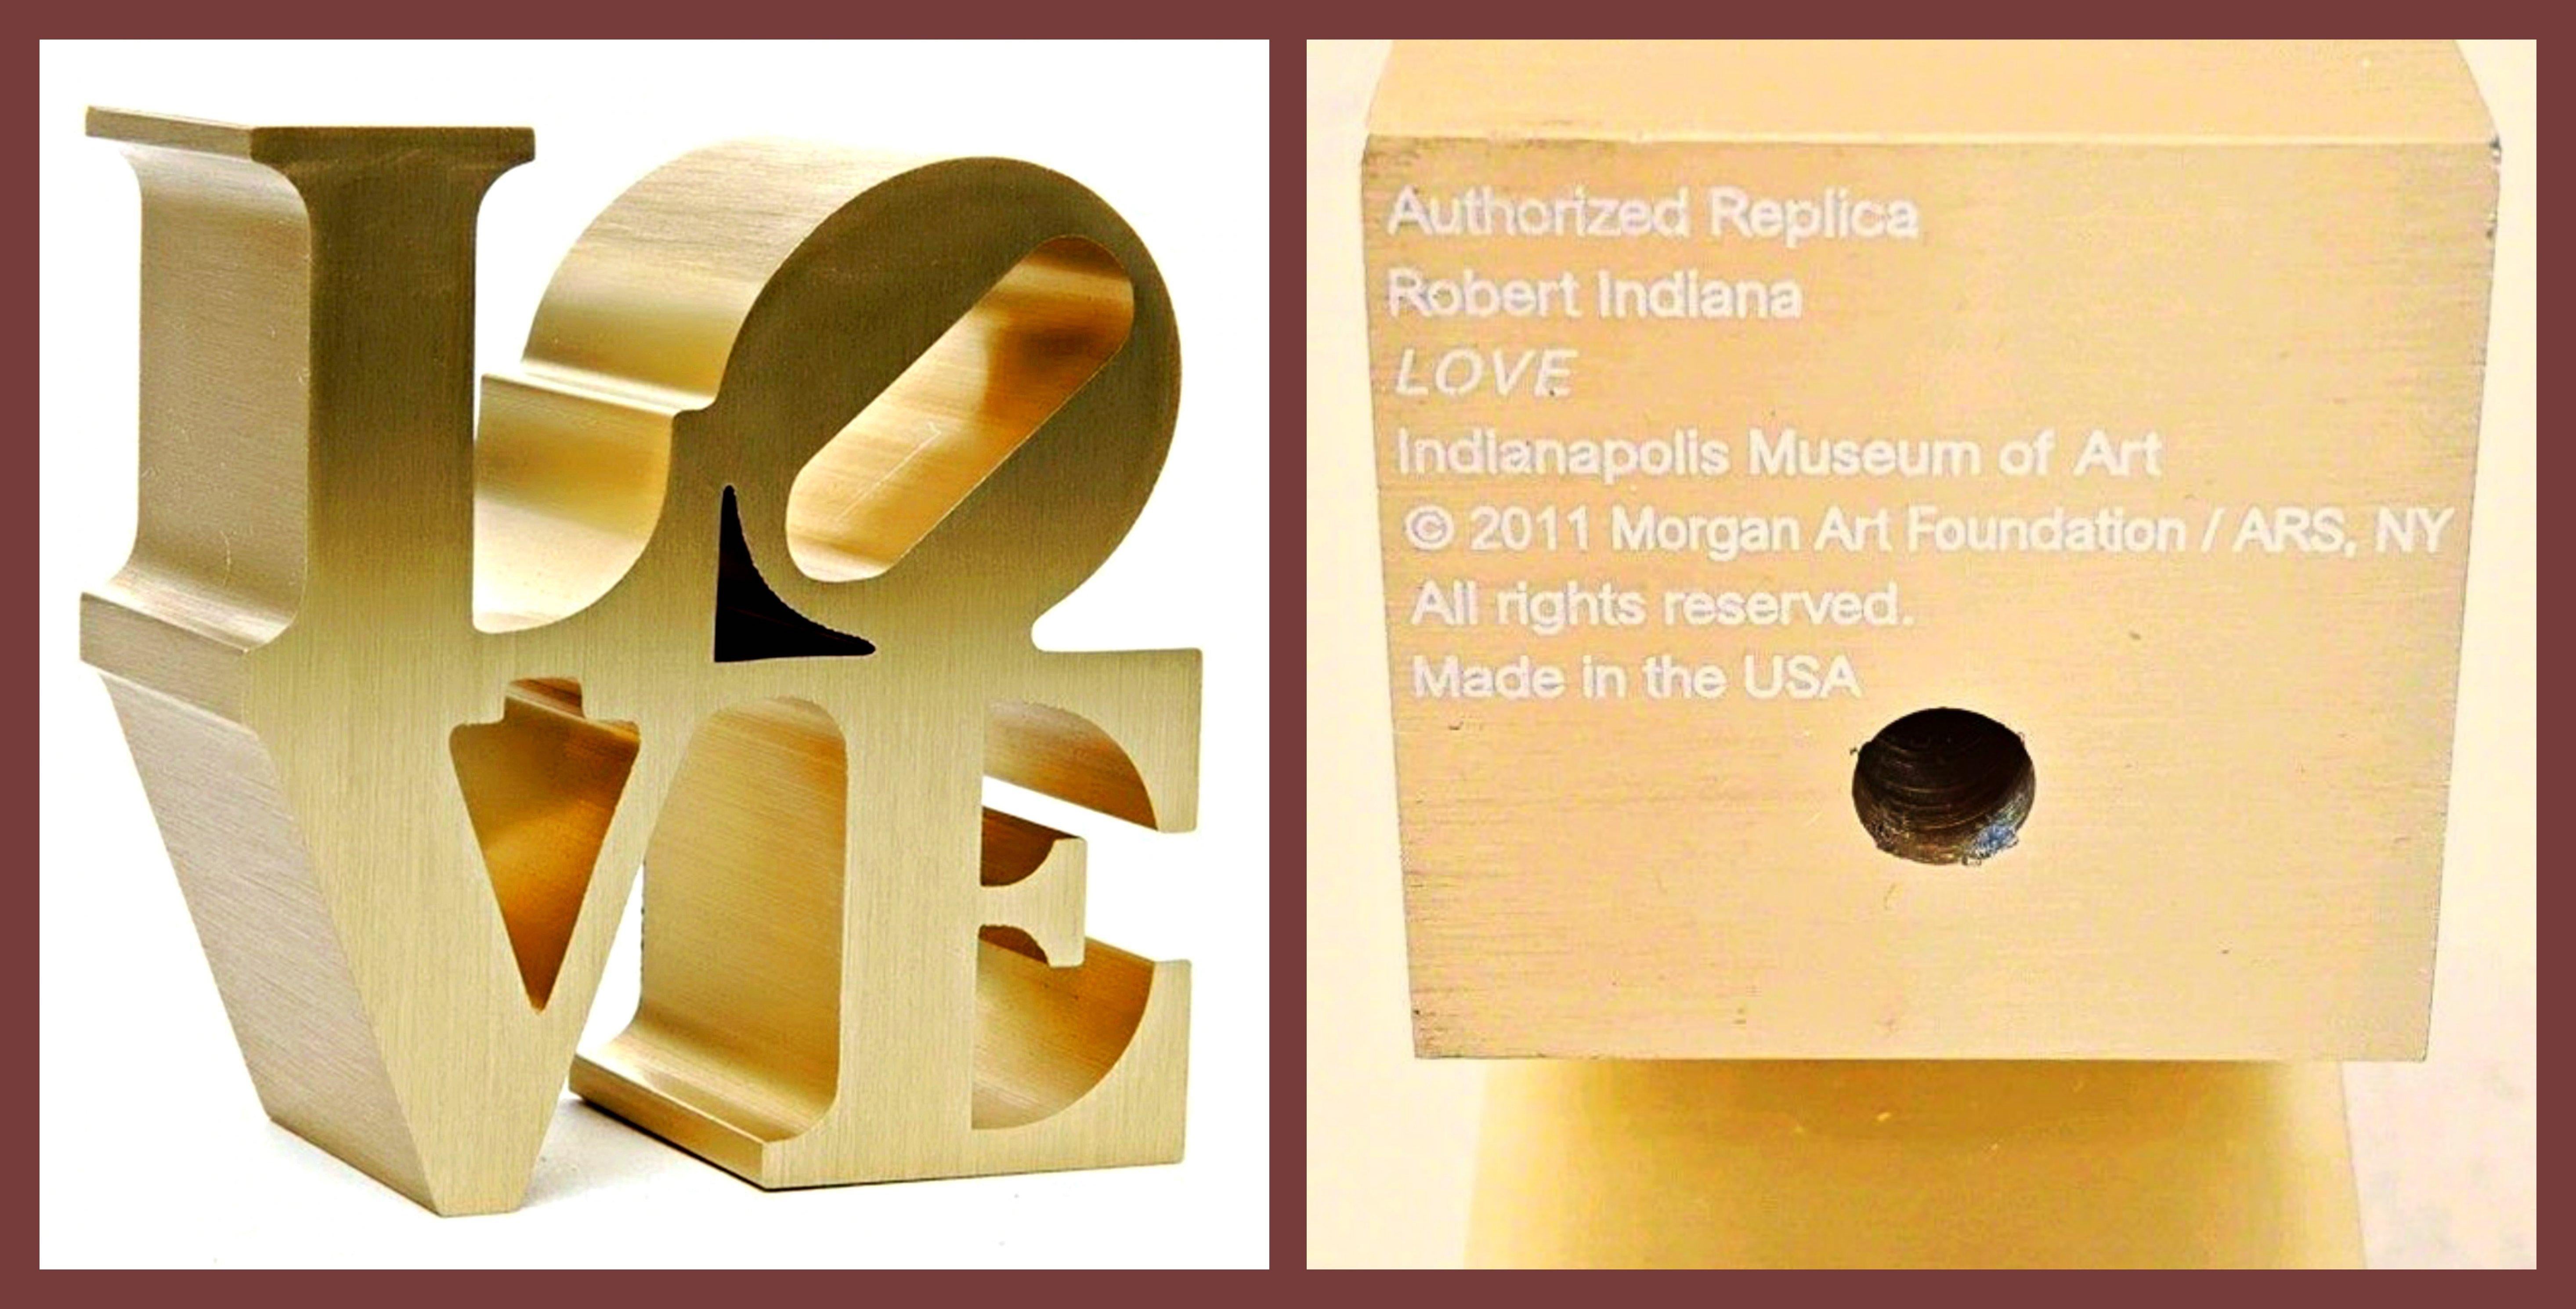 LOVE (Authorized replica, official stamp of Indianapolis Museum of Art & artist)